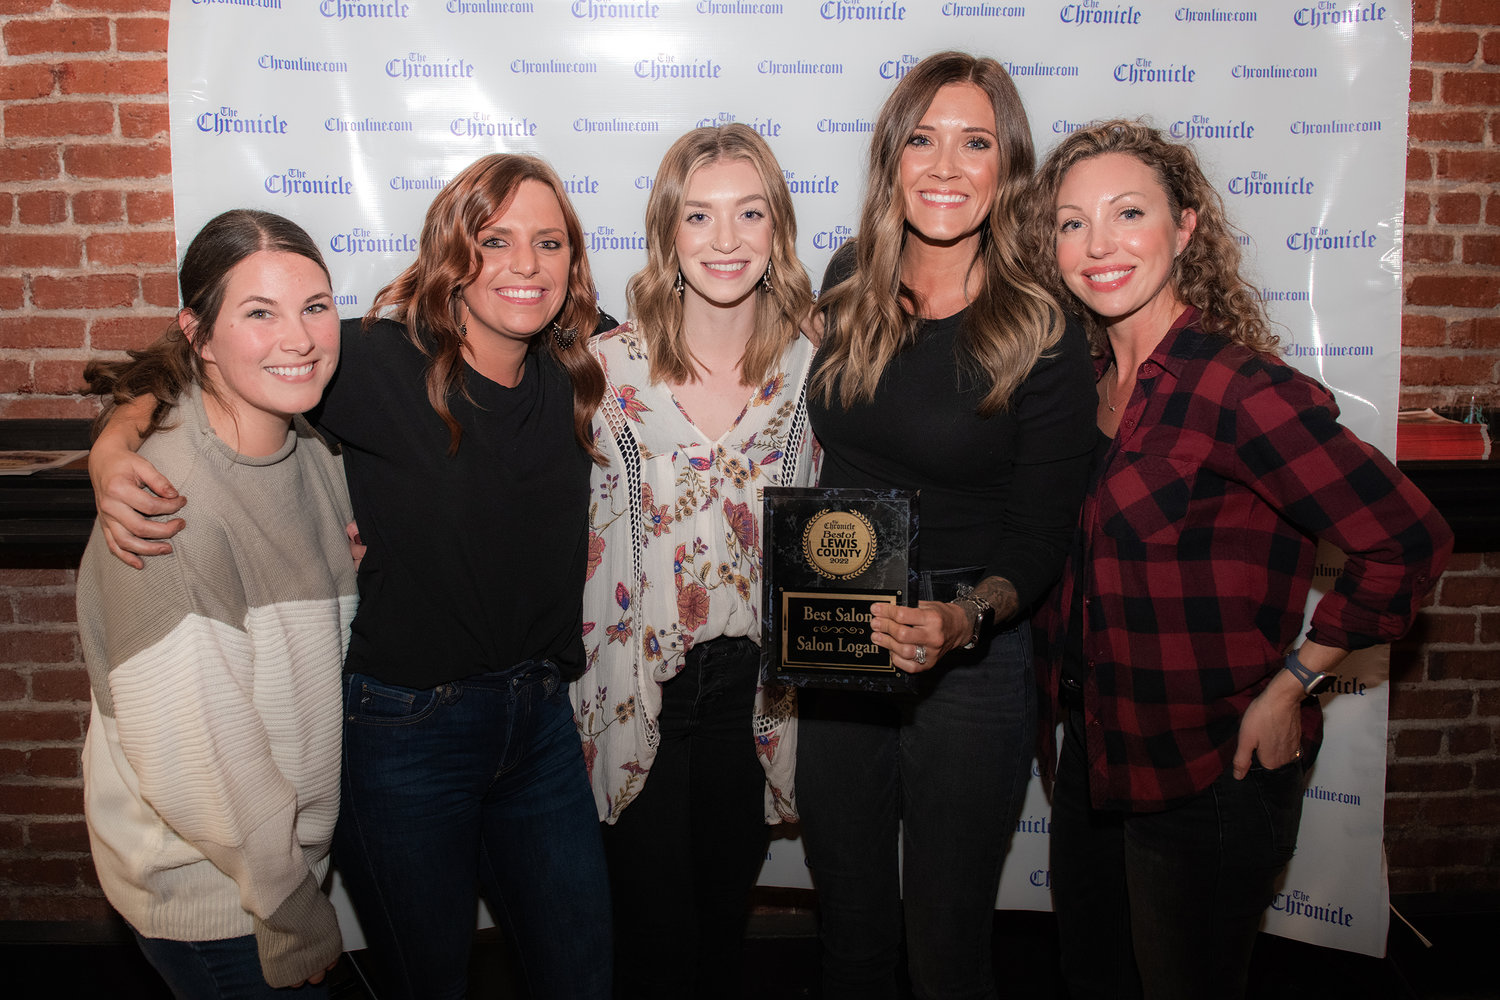 Salon Logan won “Best Salon” during the 2022 Best of Lewis County event hosted by The Chronicle at The Juice Box Thursday evening in Centralia.